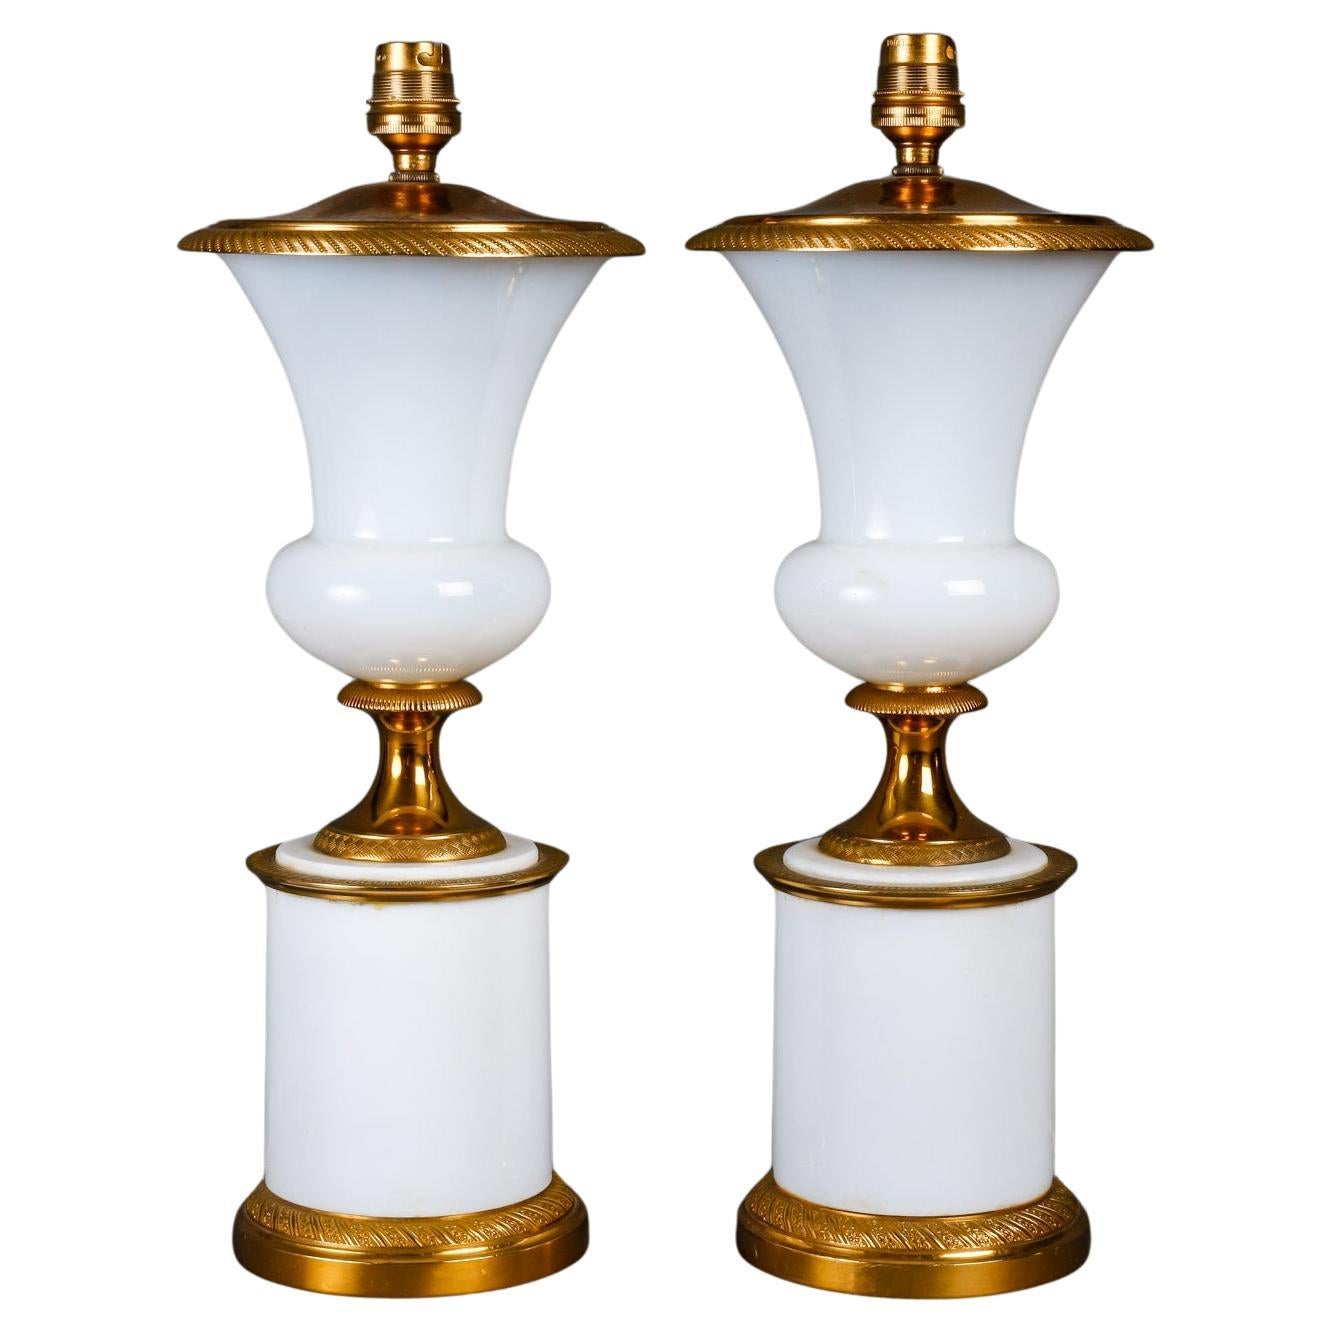 Pair of Medici Shaped Opaline Lamps, Early 20th Century. For Sale